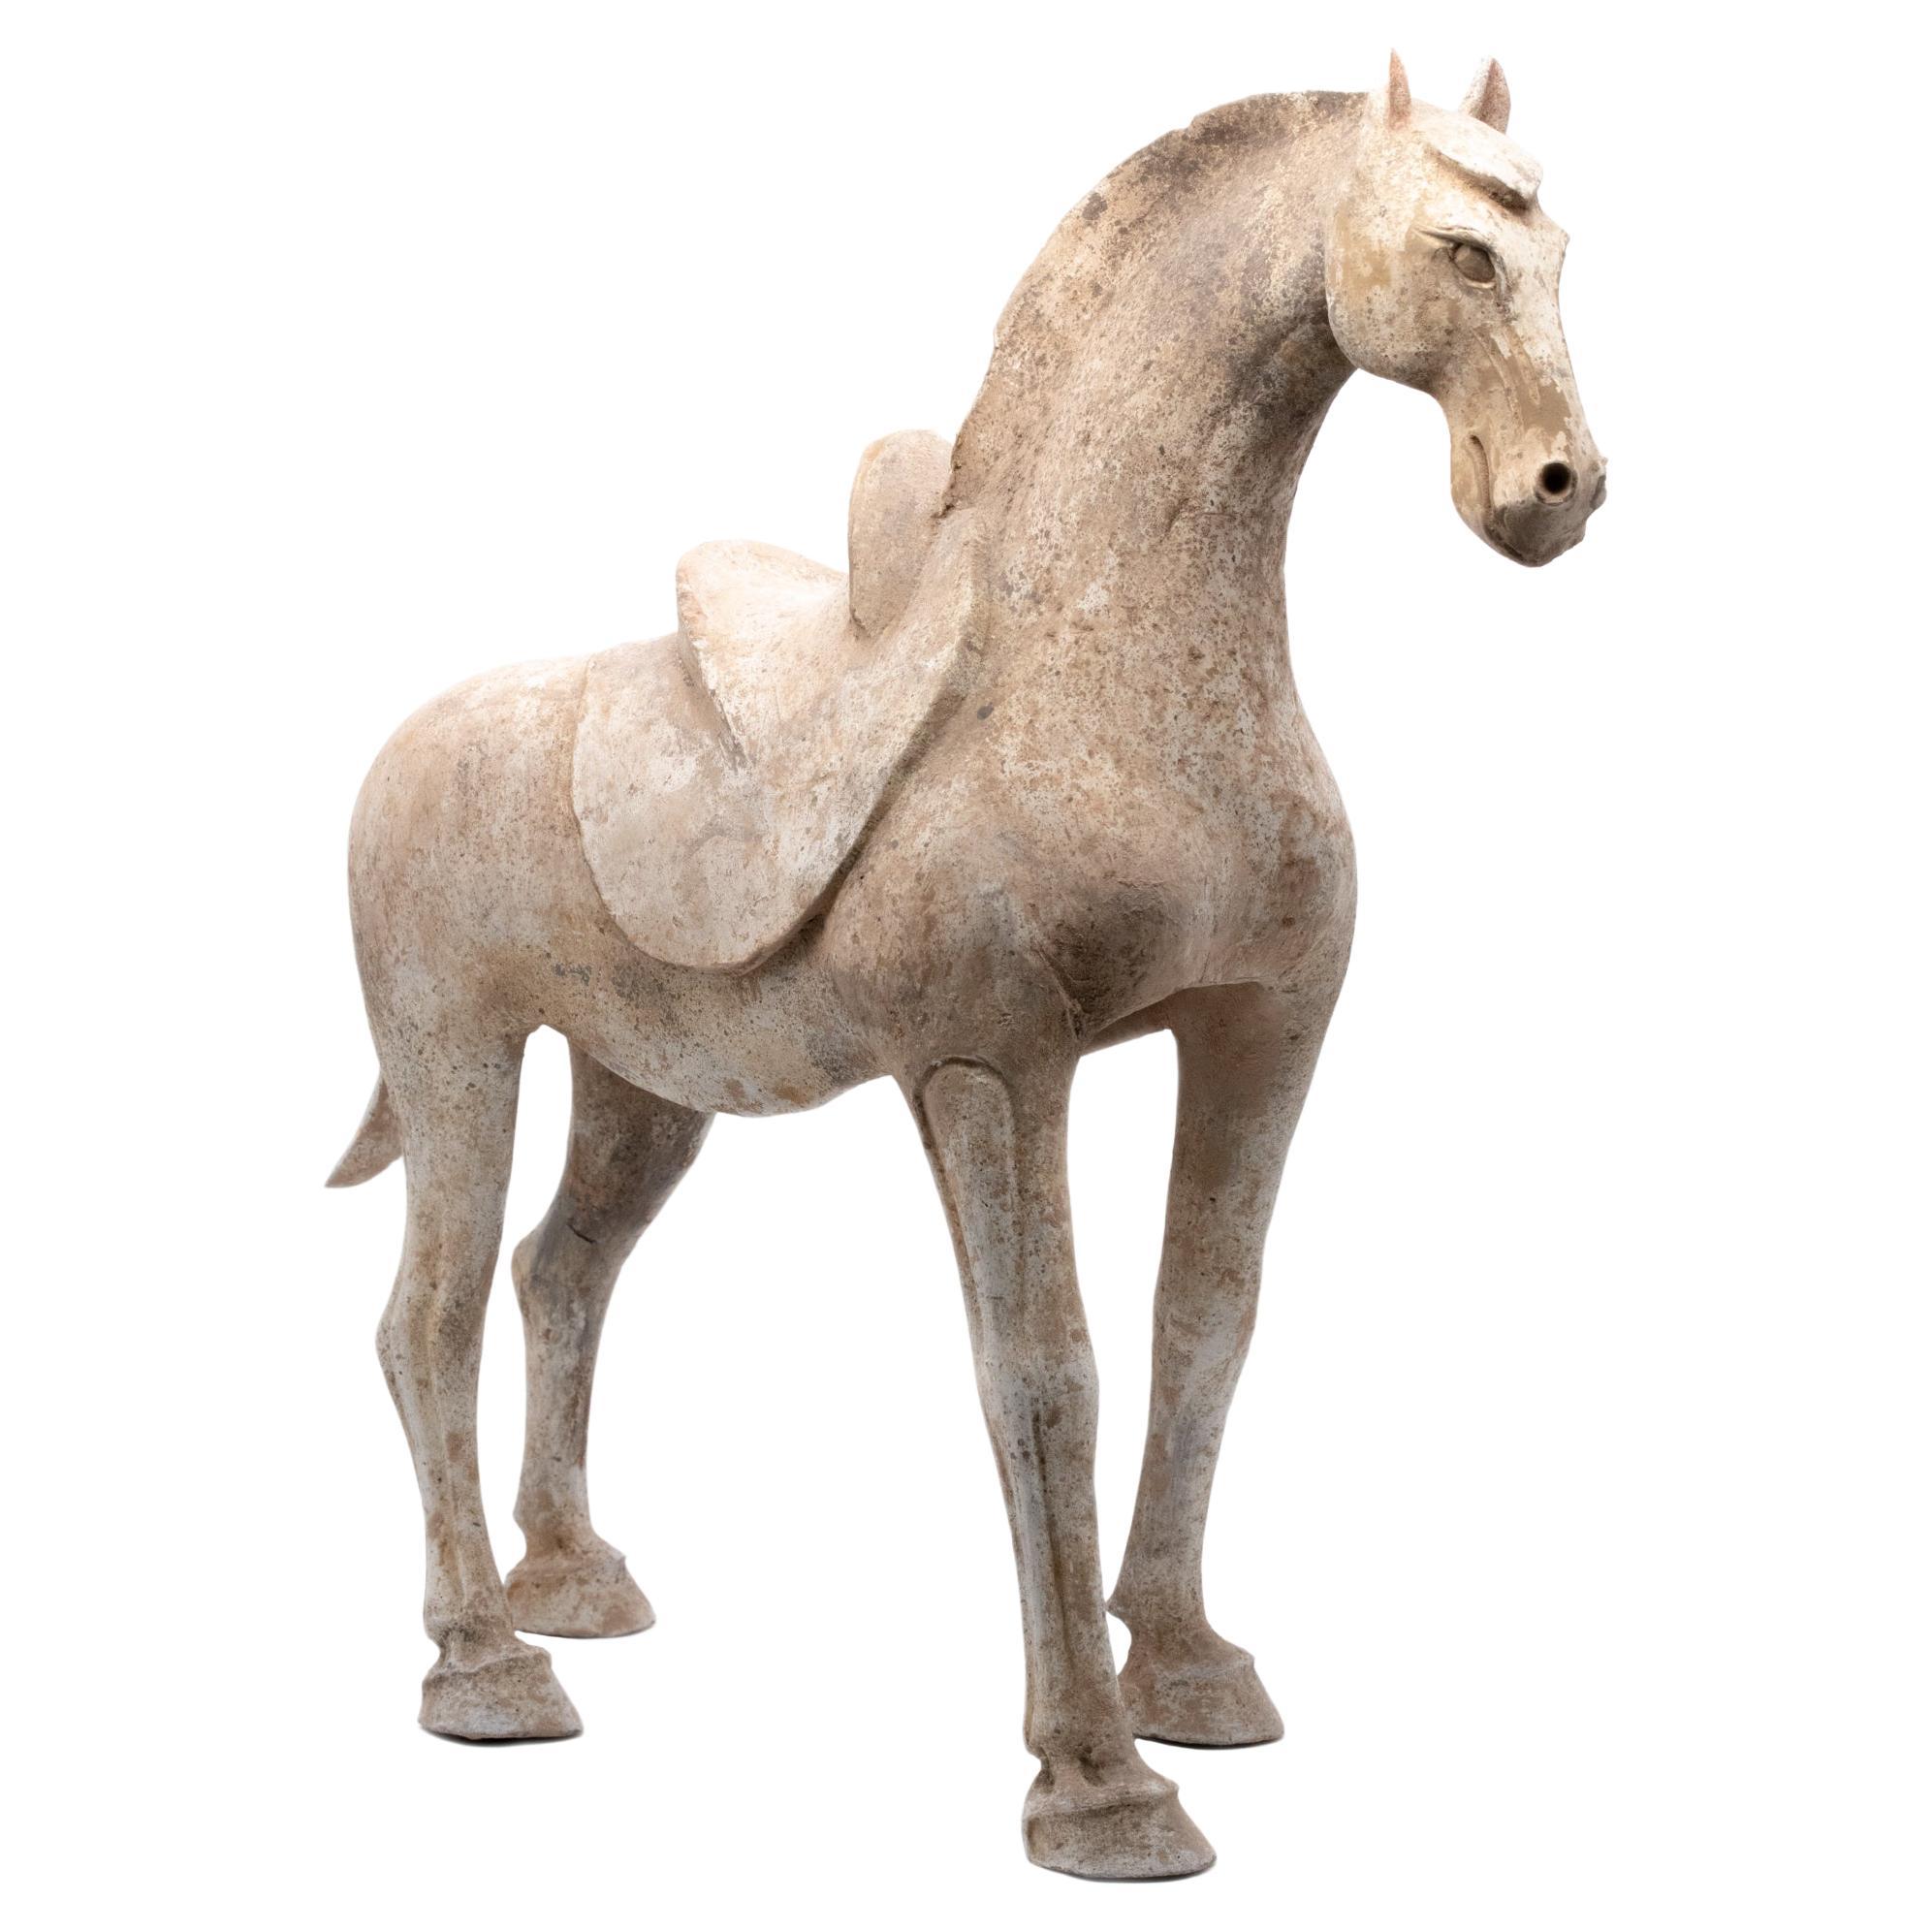 China 618-907 Ad Tang Dynasty Ancient Earthenware Sculpture of a Walking Horse For Sale